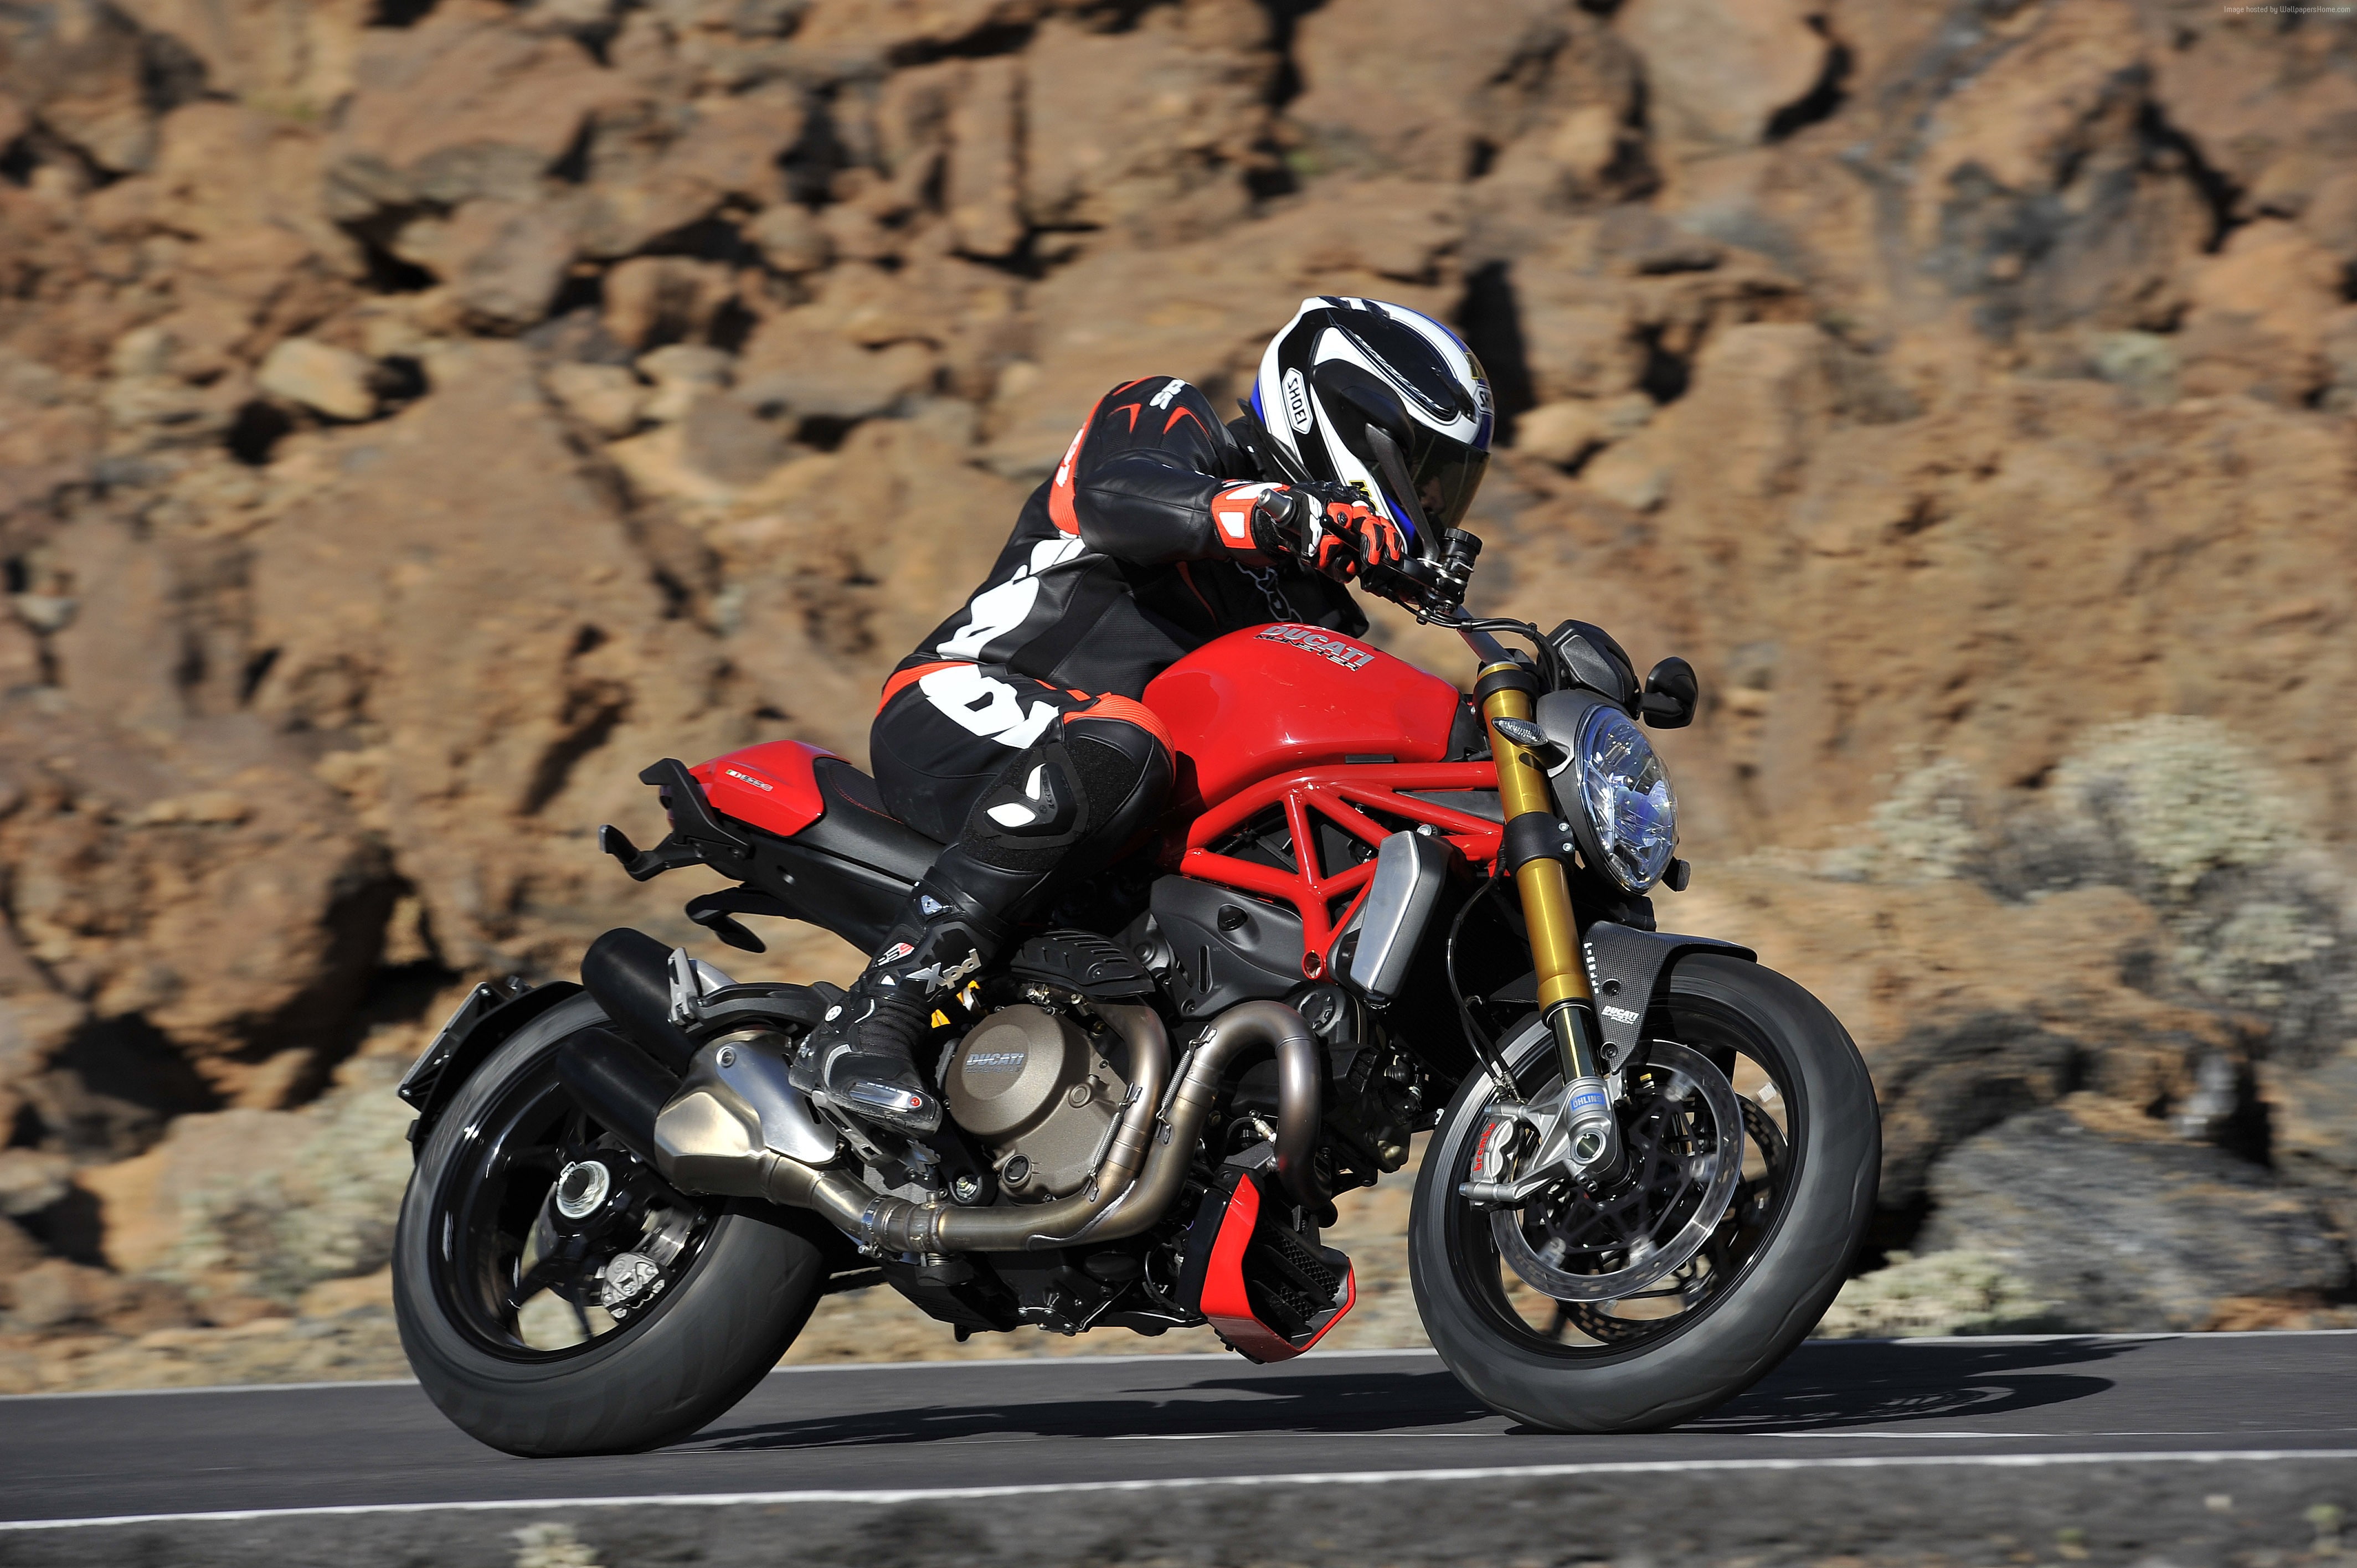 rent, review, Best Bikes 2015, test drive, Ducati Monster 1200S